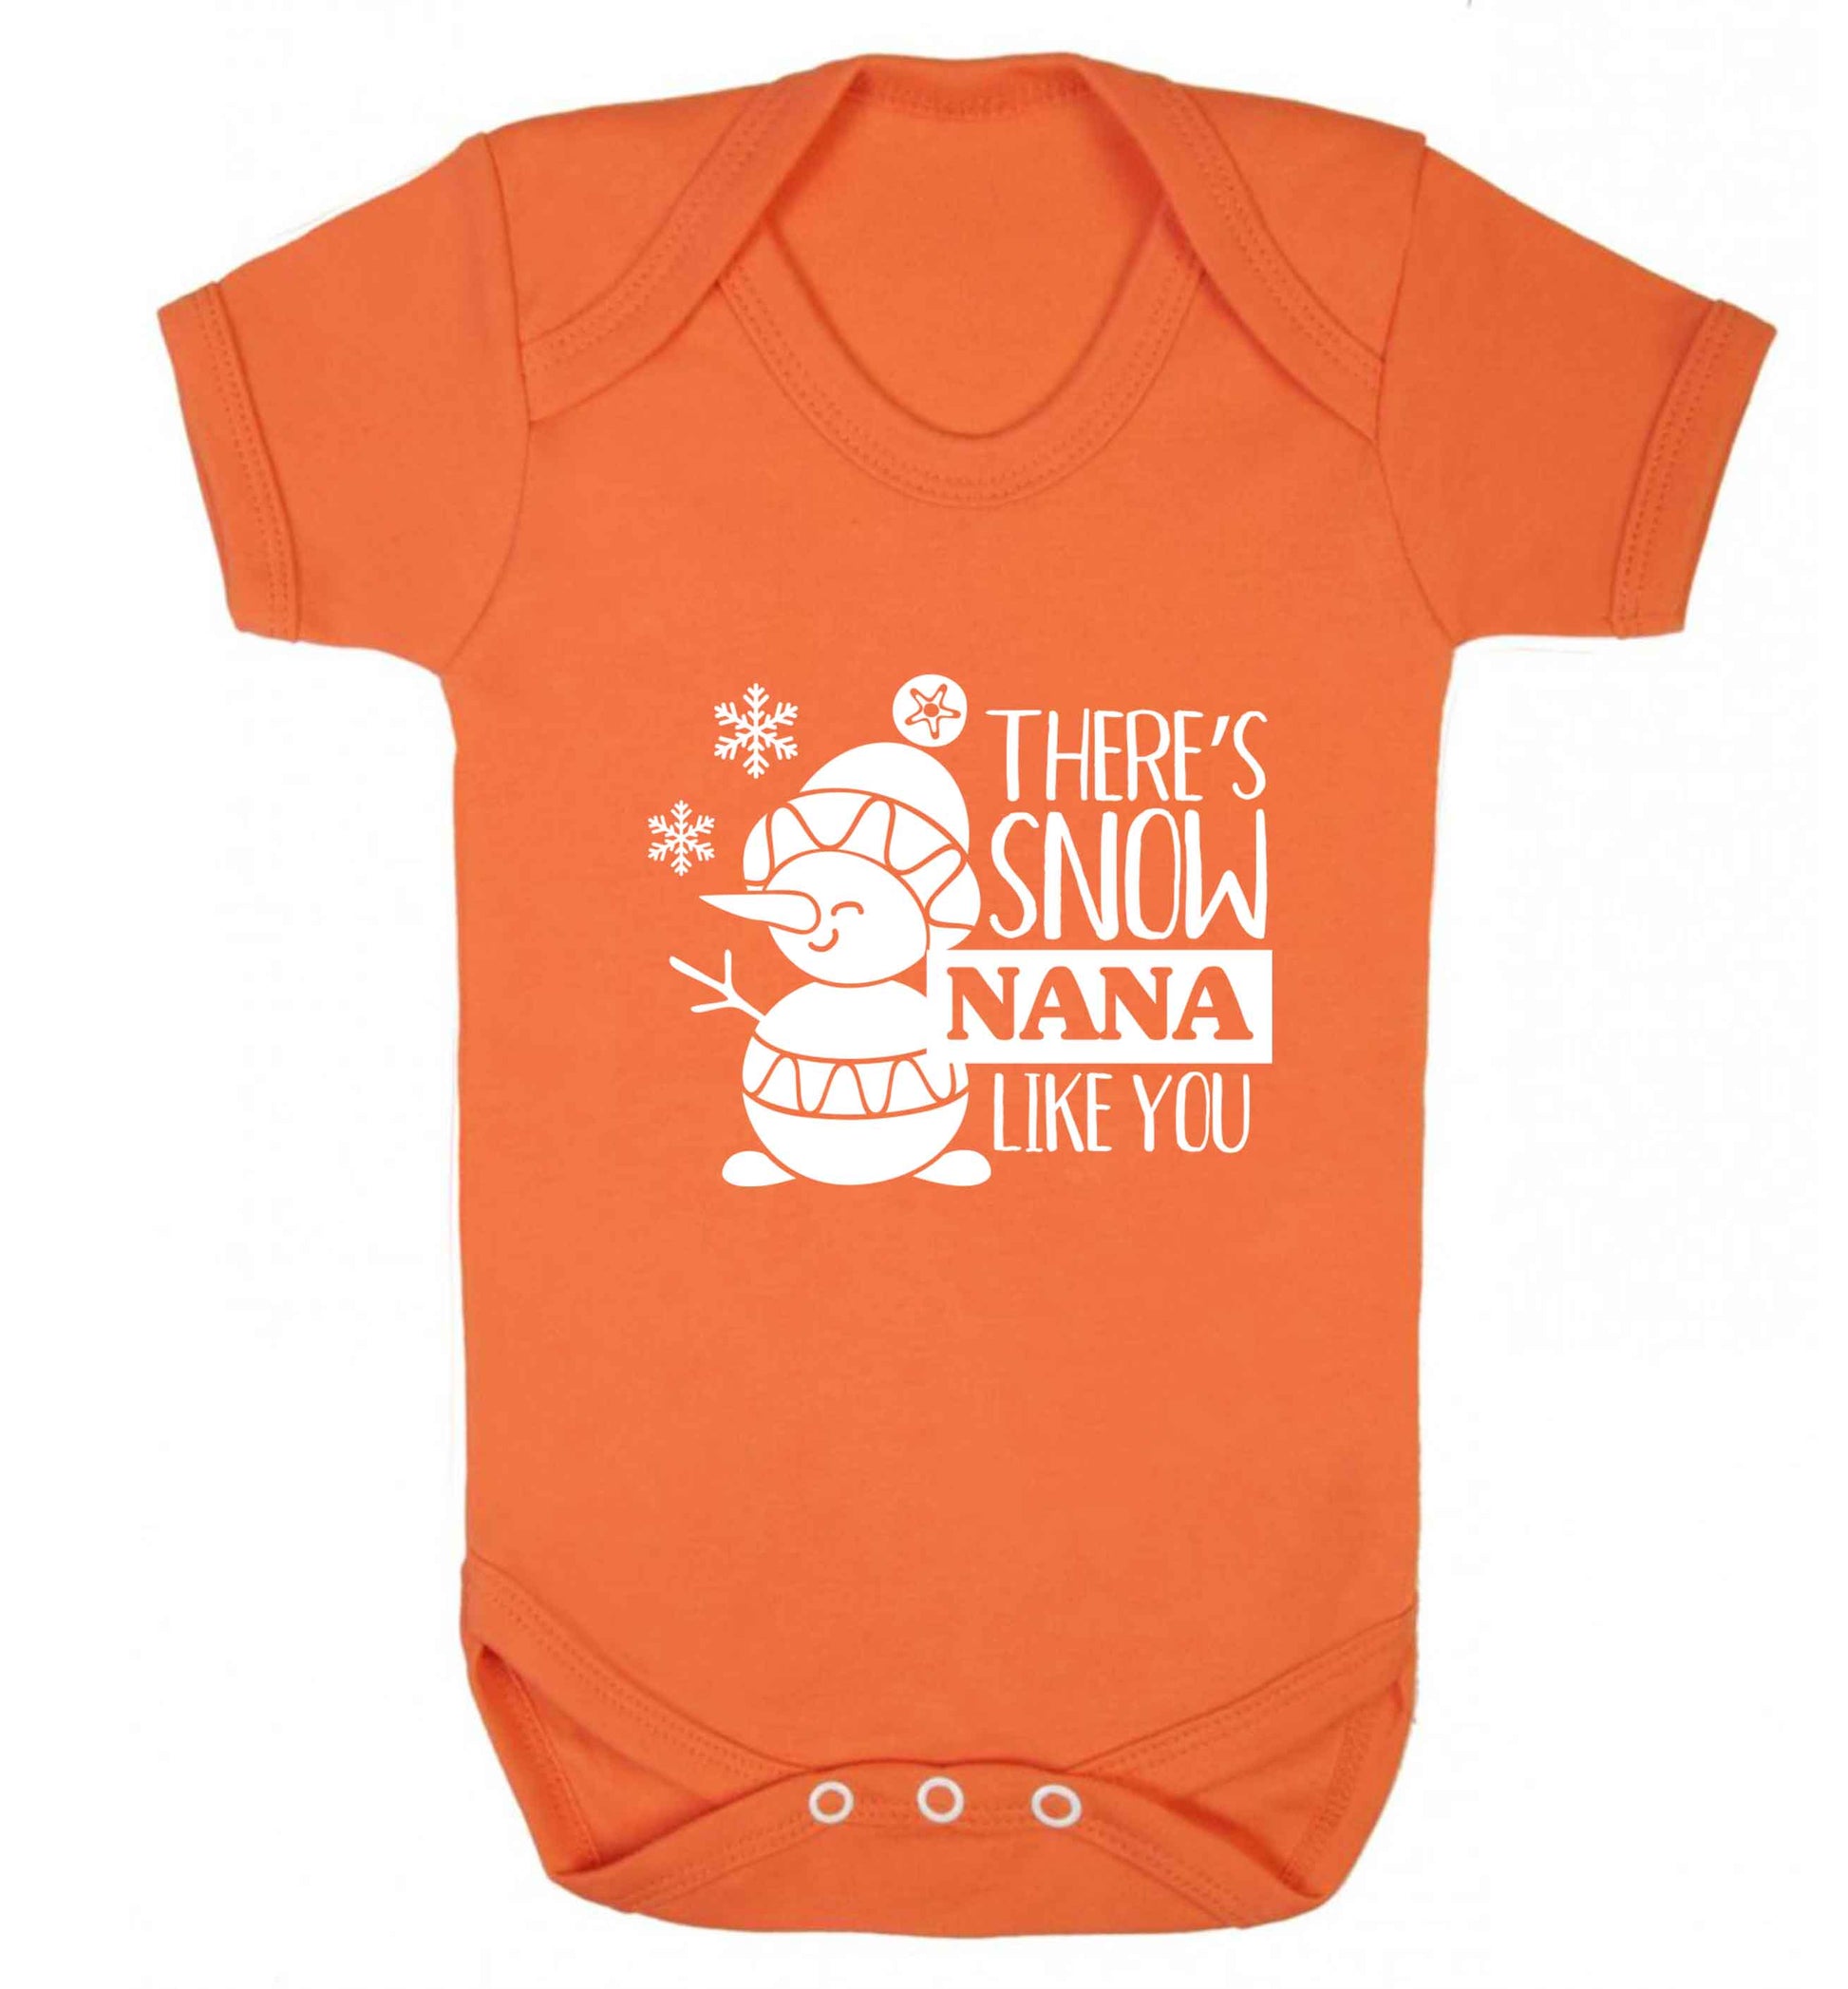 There's snow nana like you baby vest orange 18-24 months